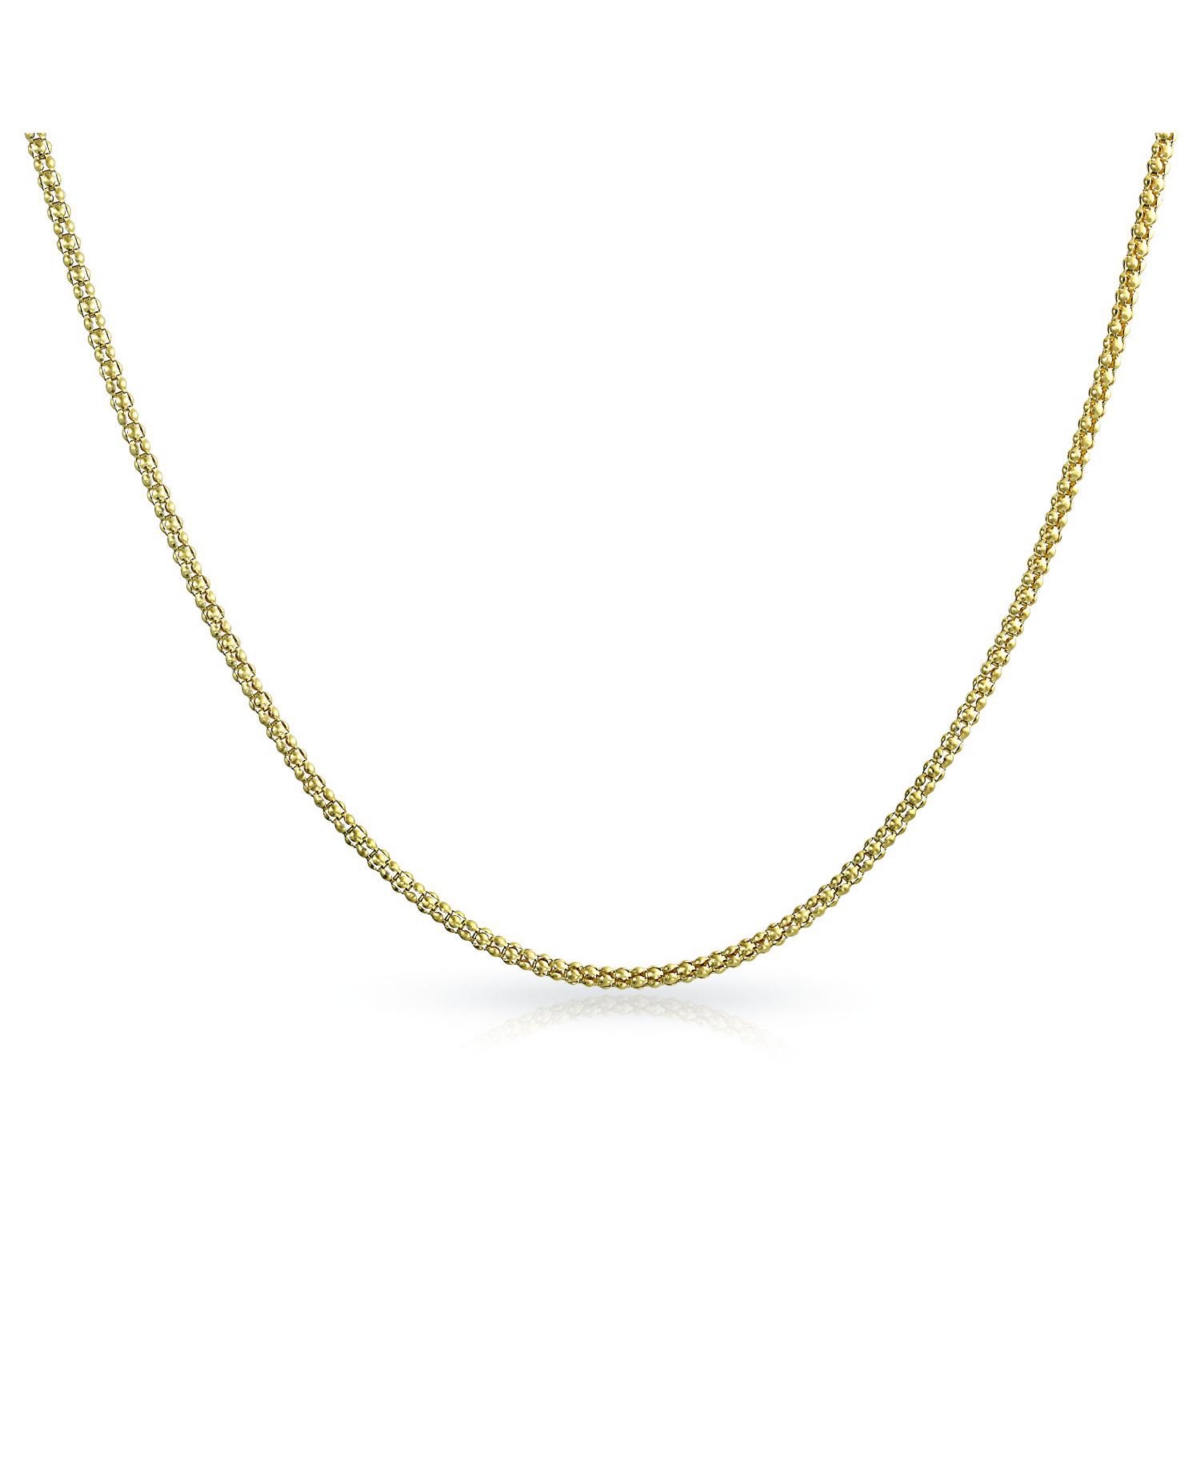 Popcorn Coreana Chain Necklace Black Oxidized Gold Plated Sterling Silver 030 Gauge 16 Inch - Gold-tone